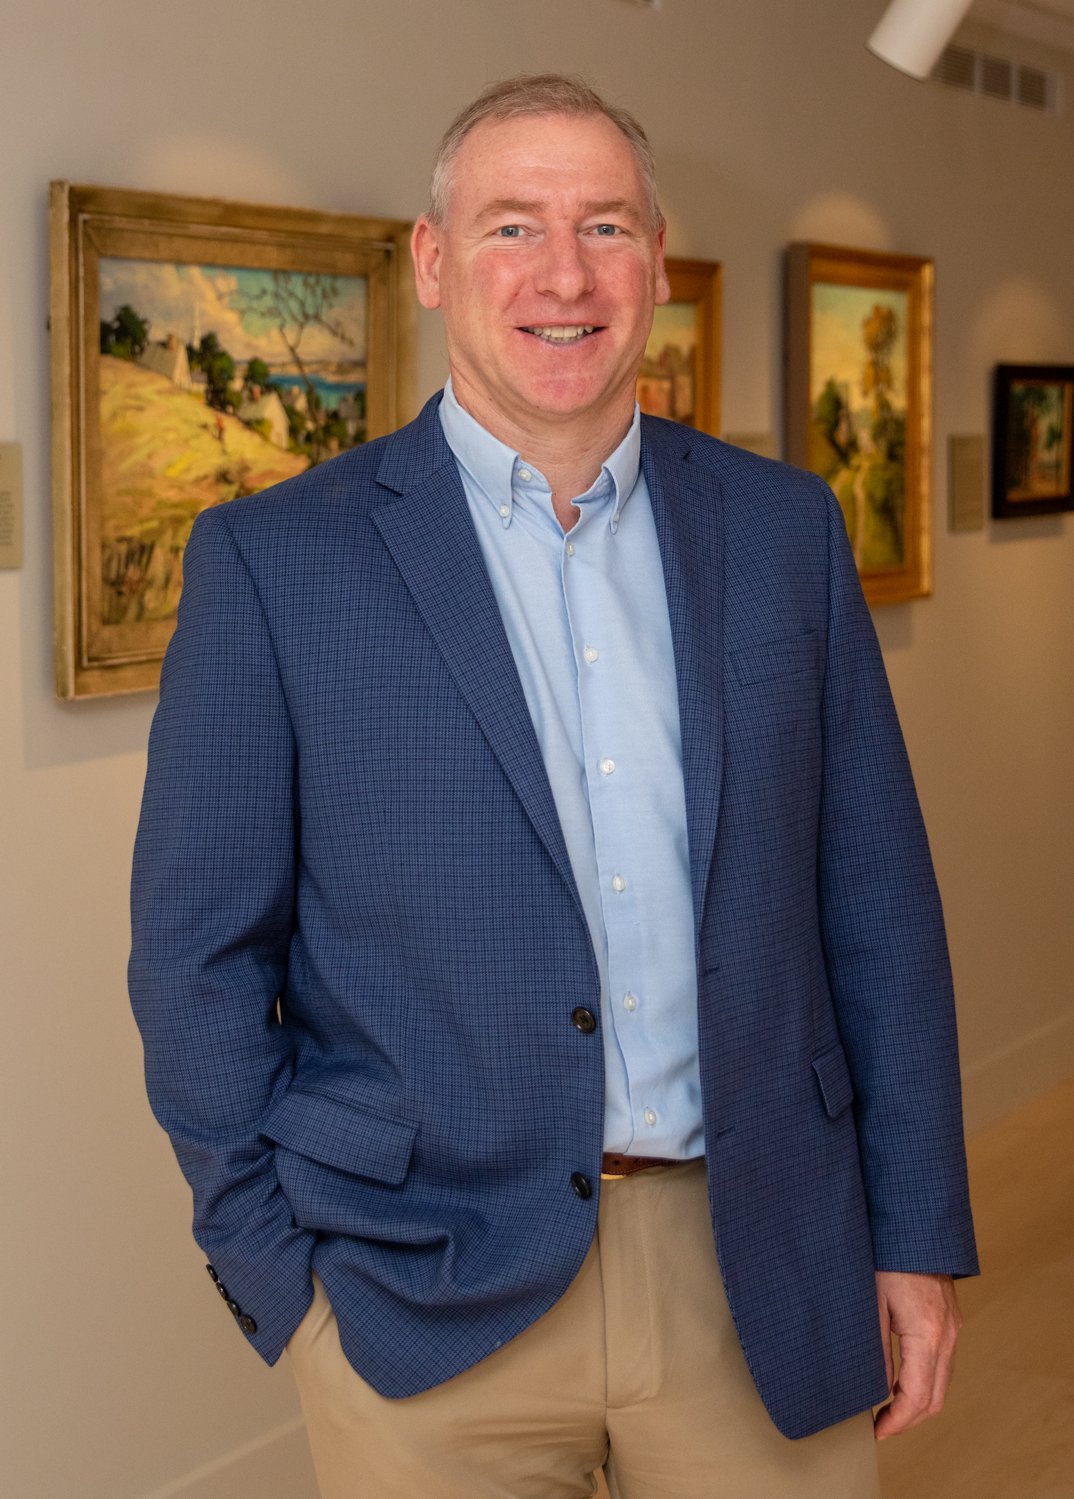 James Russell was put on administrative leave this week from his role as executive director of the Nantucket Historical Commission.